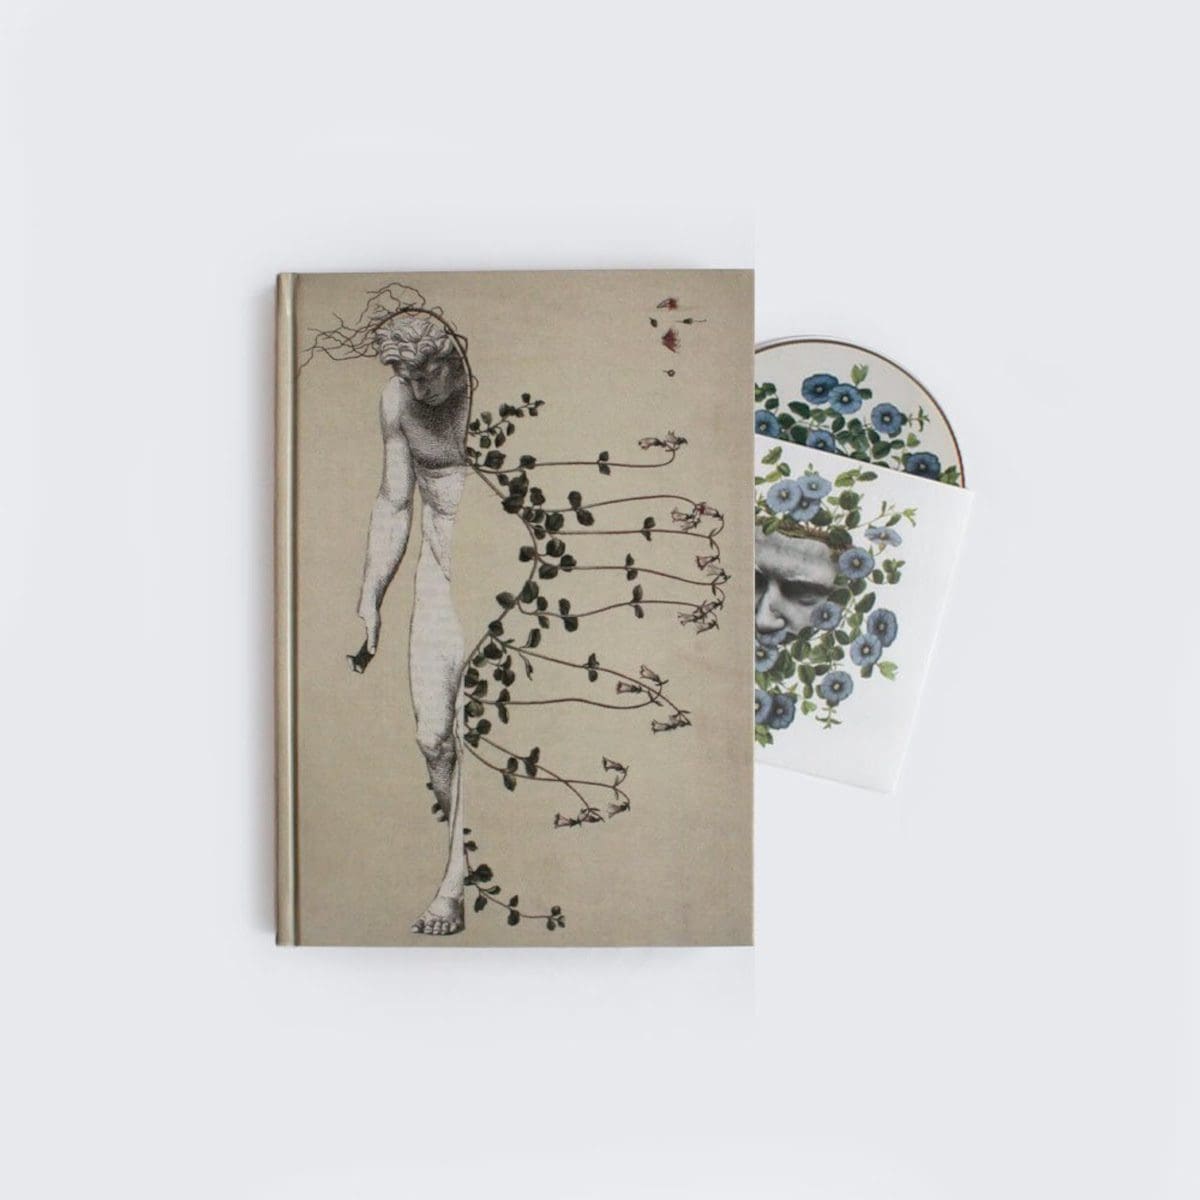 Danish artist øjeRum offers 'Stigma' book and CD exploring the complex relationship of humans and plants